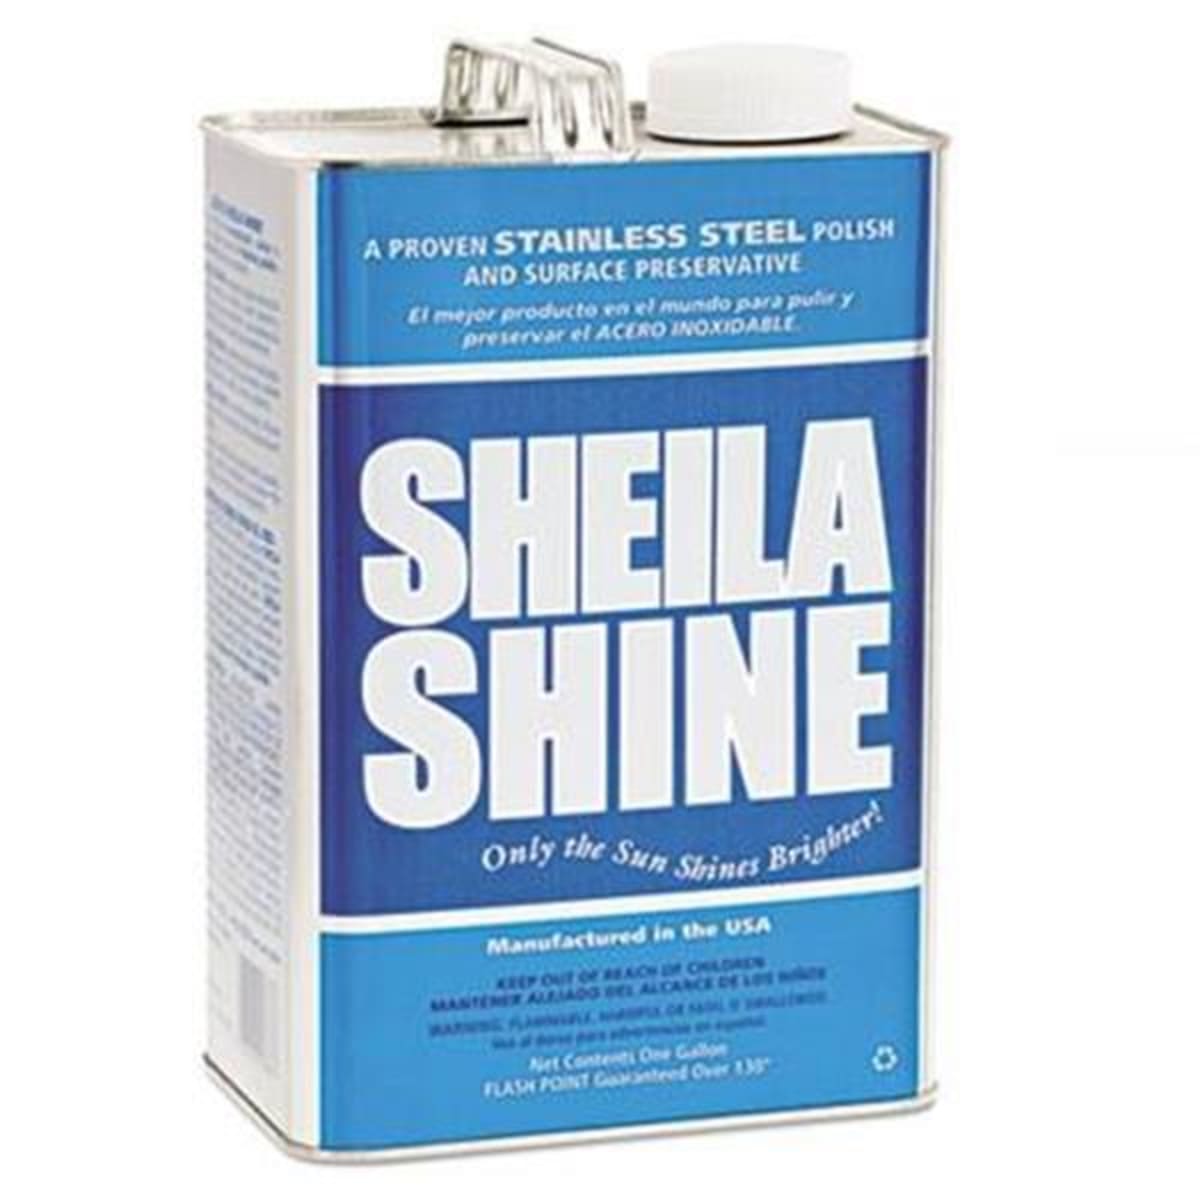 Sheila Shine 1 Qt. Low VOC Stainless Steel Cleaner, Polish